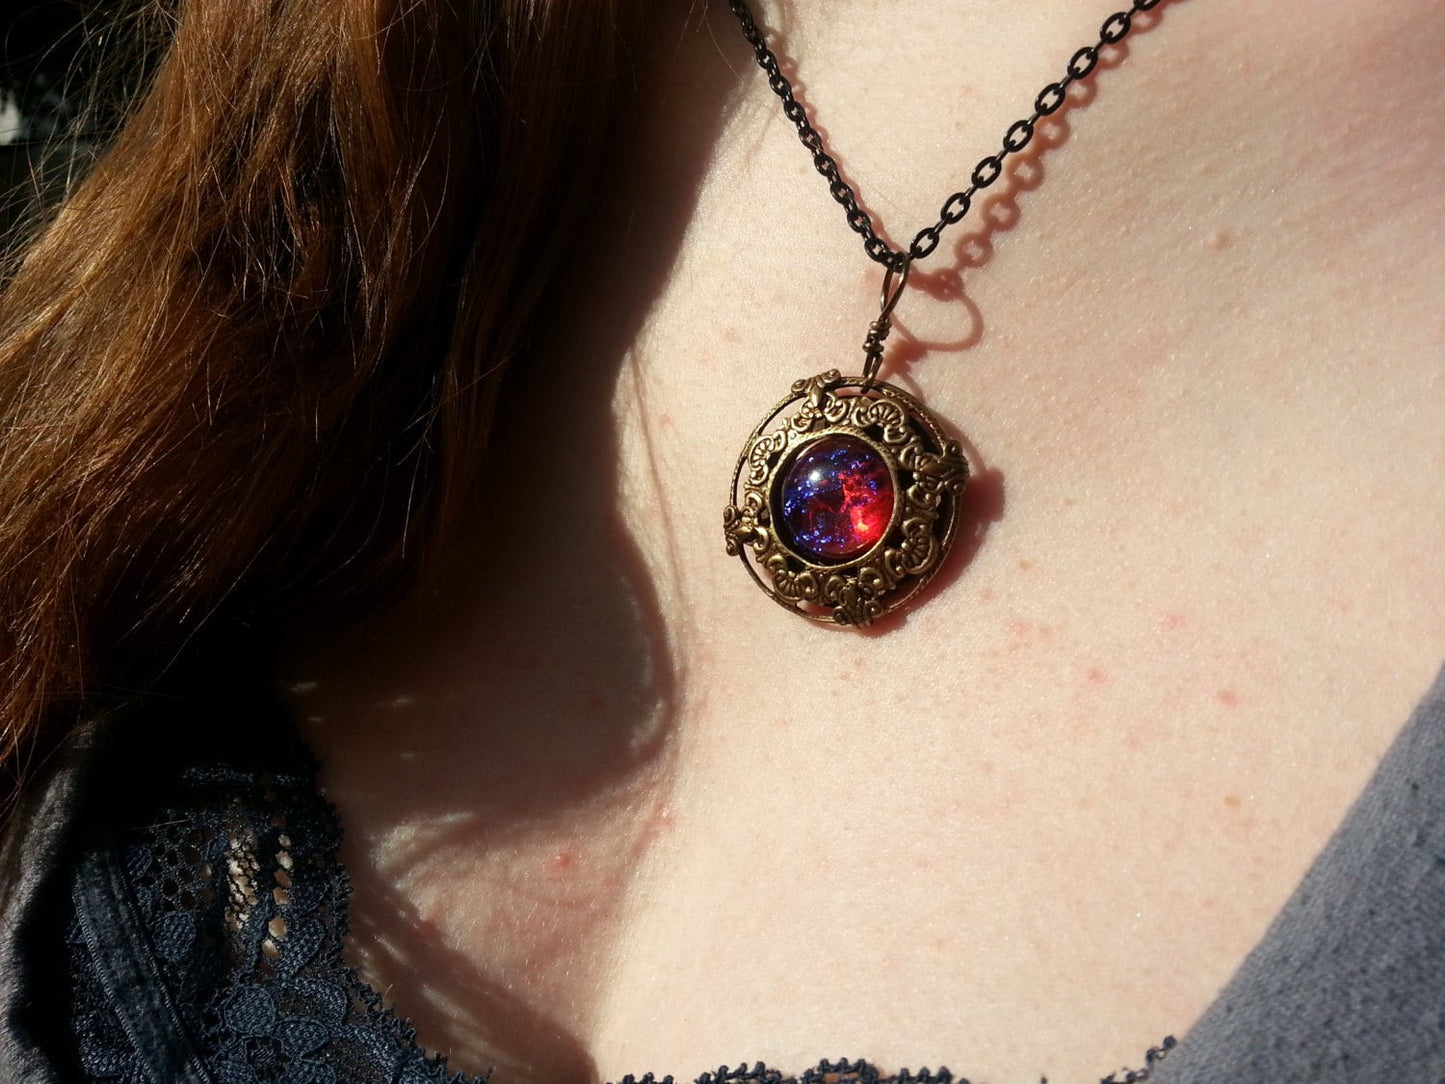 Fire Opal Necklace, Dragon's Breath Necklace, Filigree Necklace, Opal Necklace, Ren Faire, Game Con, Comic Con, Free Shipping, Summer  gifts